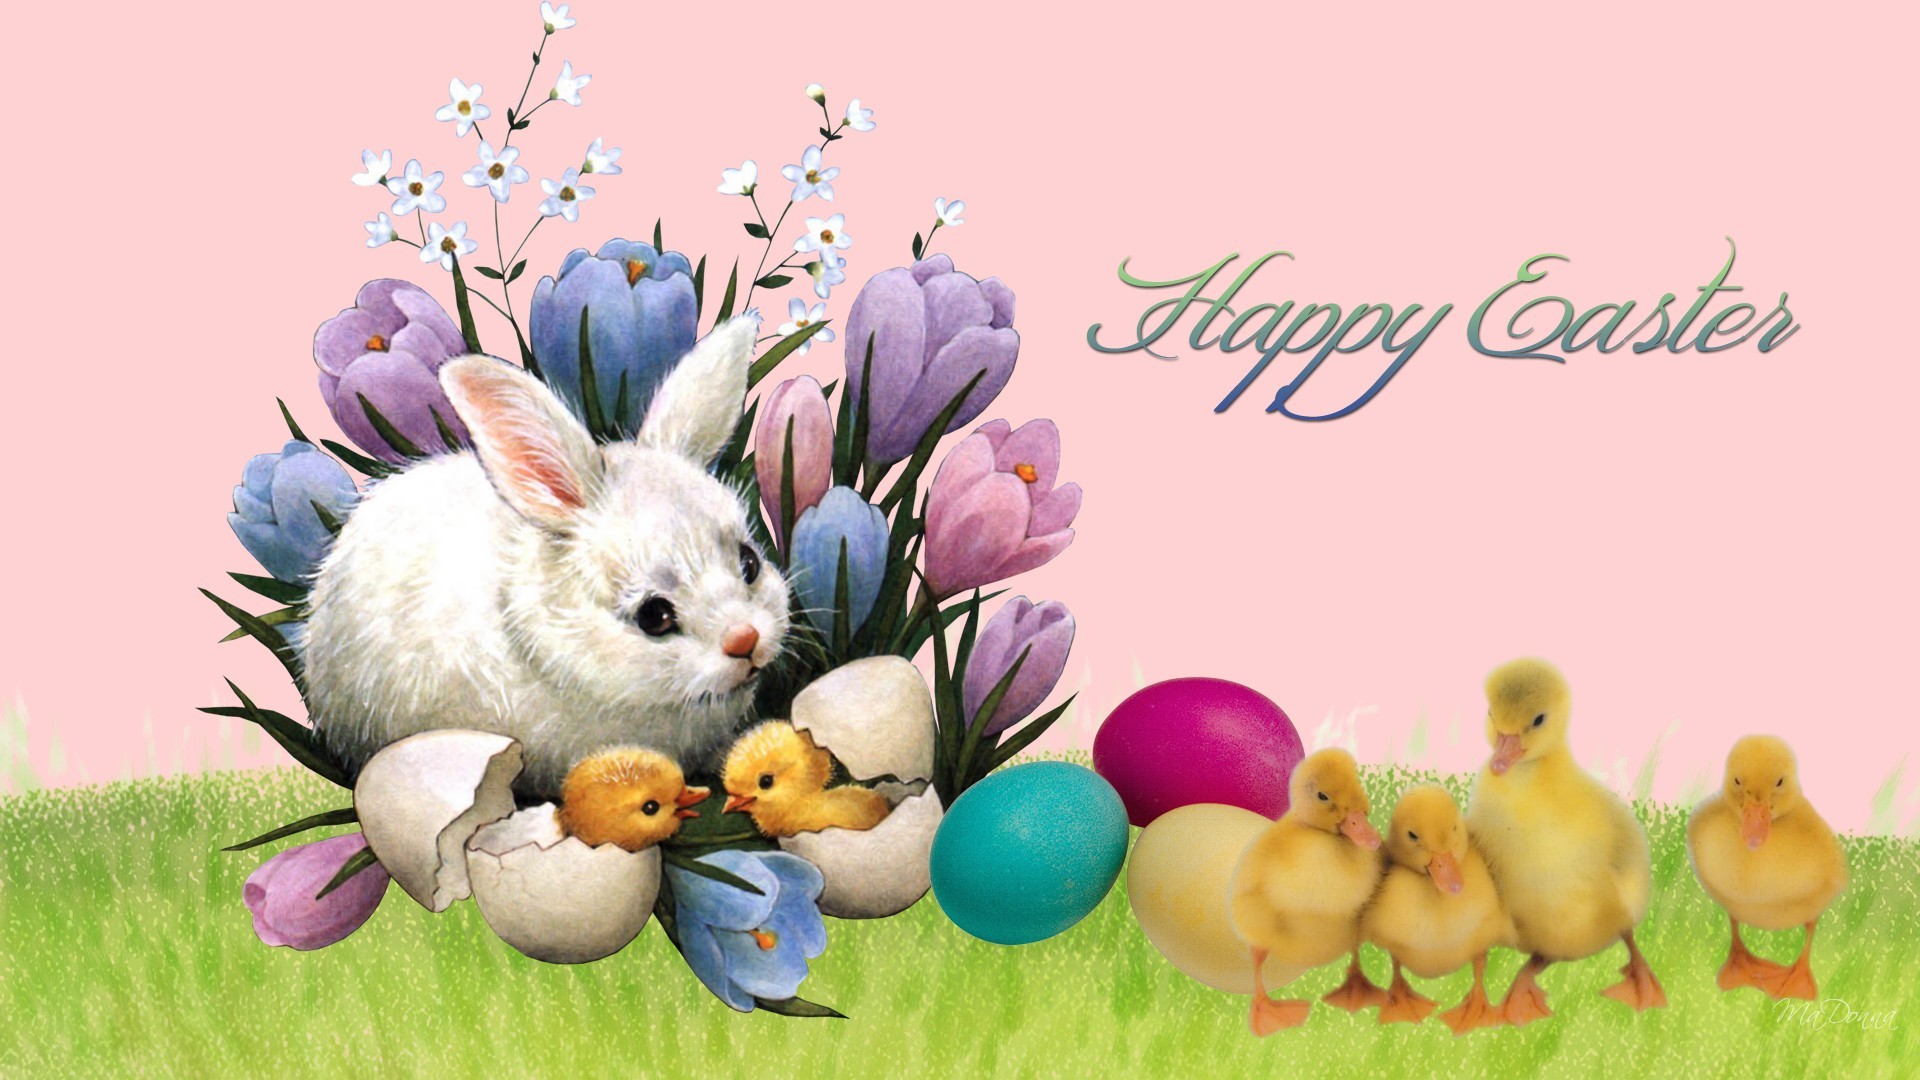 1920x1080 Free Easter Bunny Wallpaper (14)